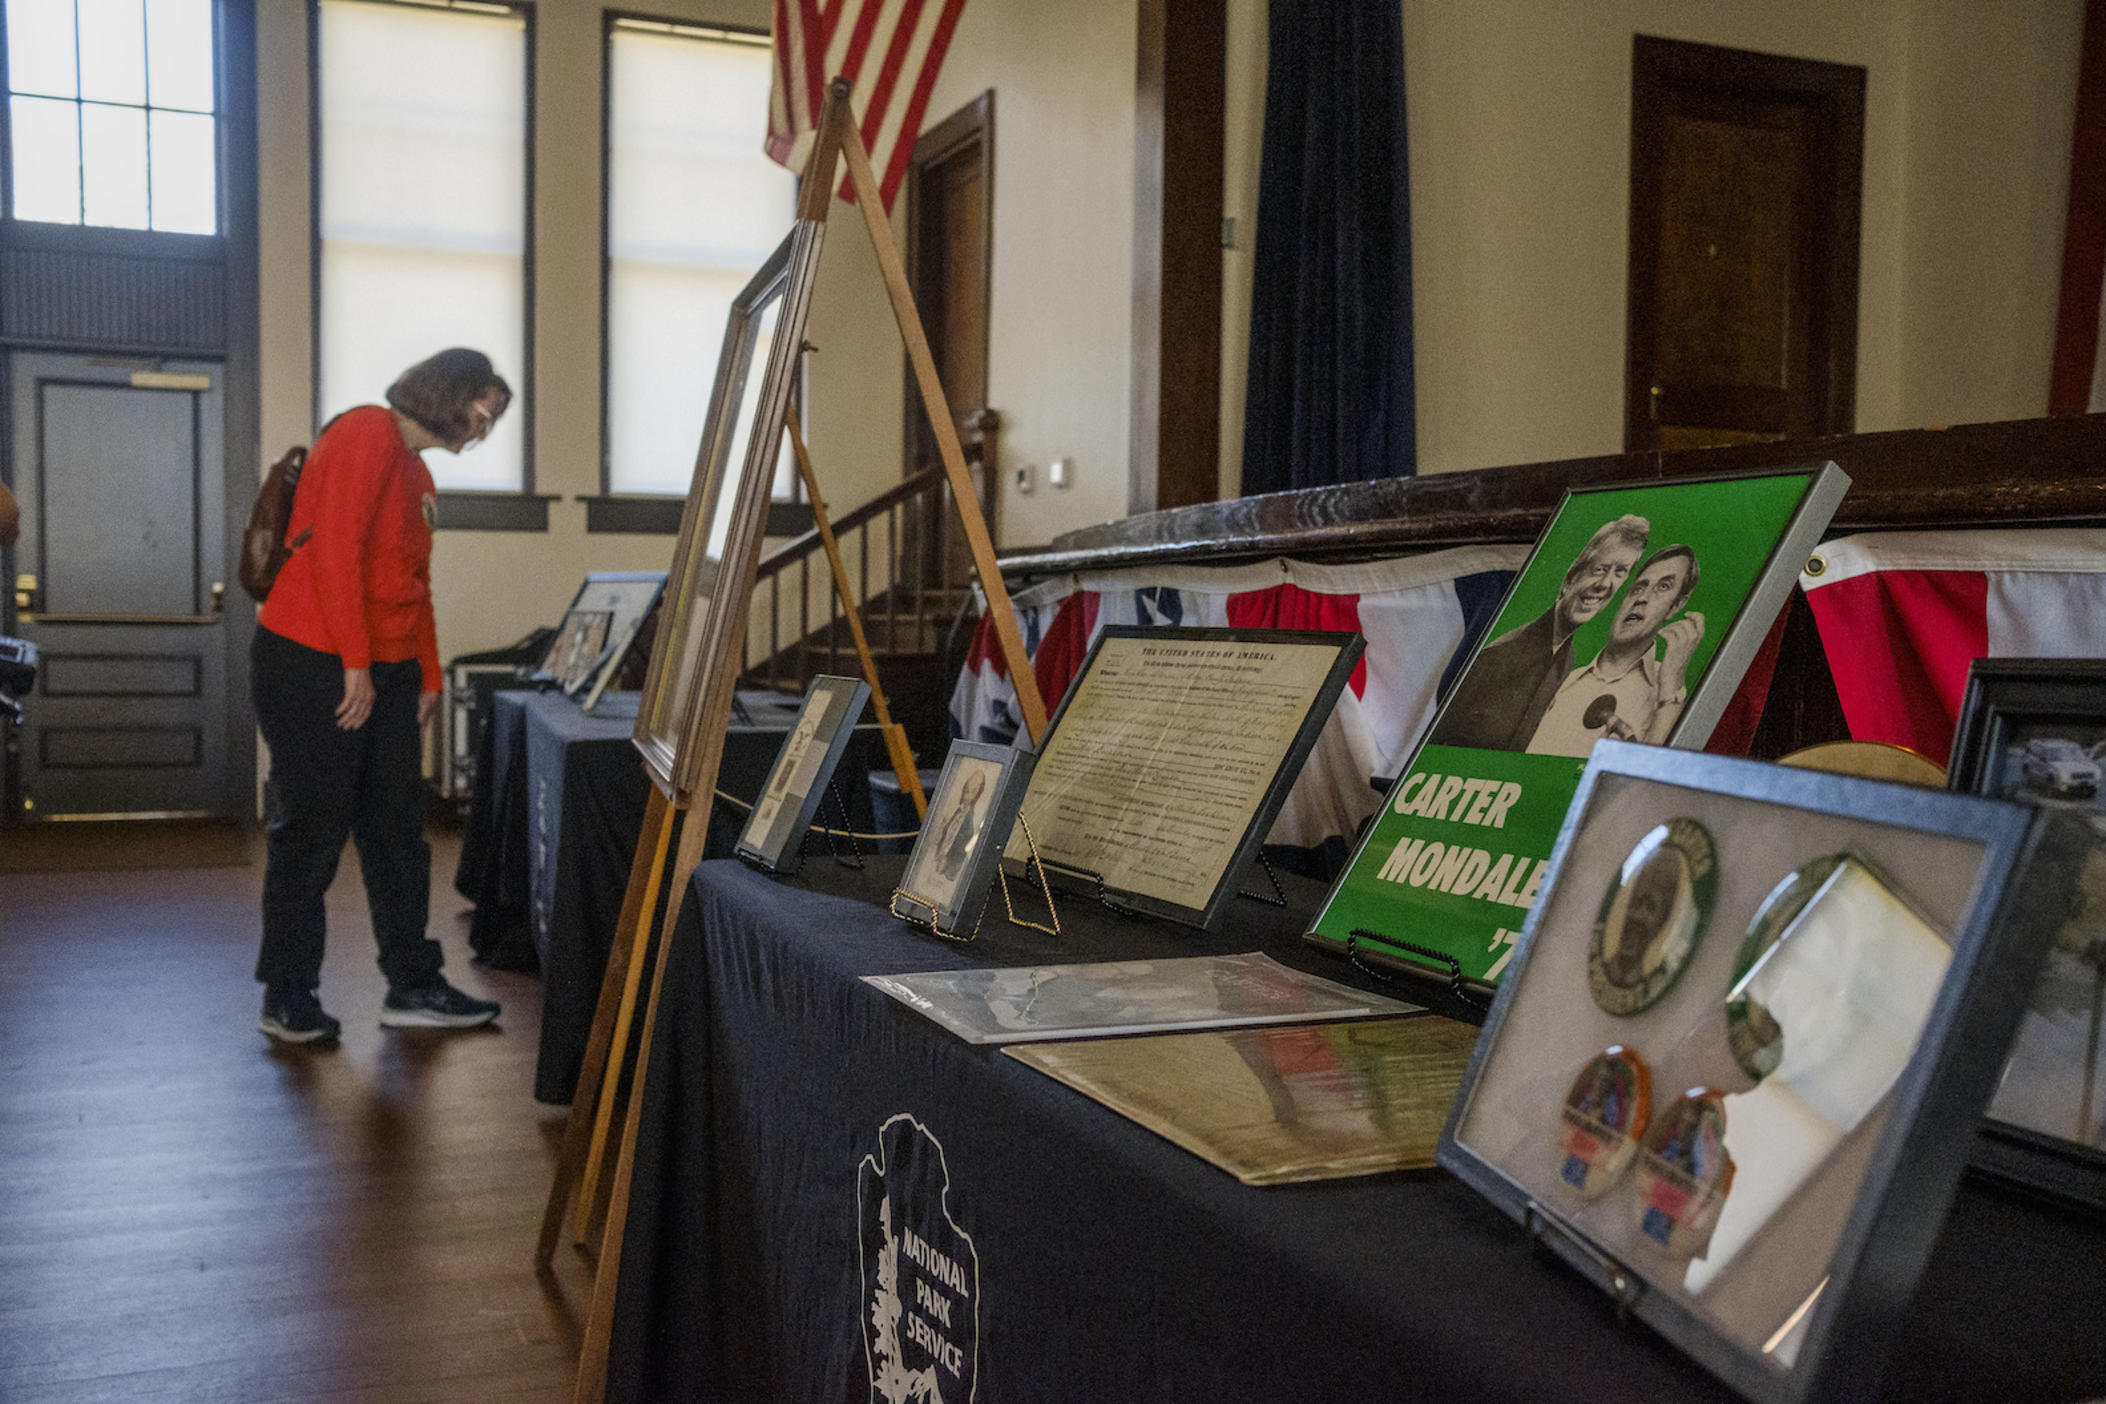 Rebecca Davenport of Columbus, Ga looks at presidential memorabilia on display for the Presidents' Day observance at the Jimmy Carter National Historic Site in Plains, Ga. Monday. Davenport wore her own historic piece: a pin from Carter's 1977 presidential inauguration.